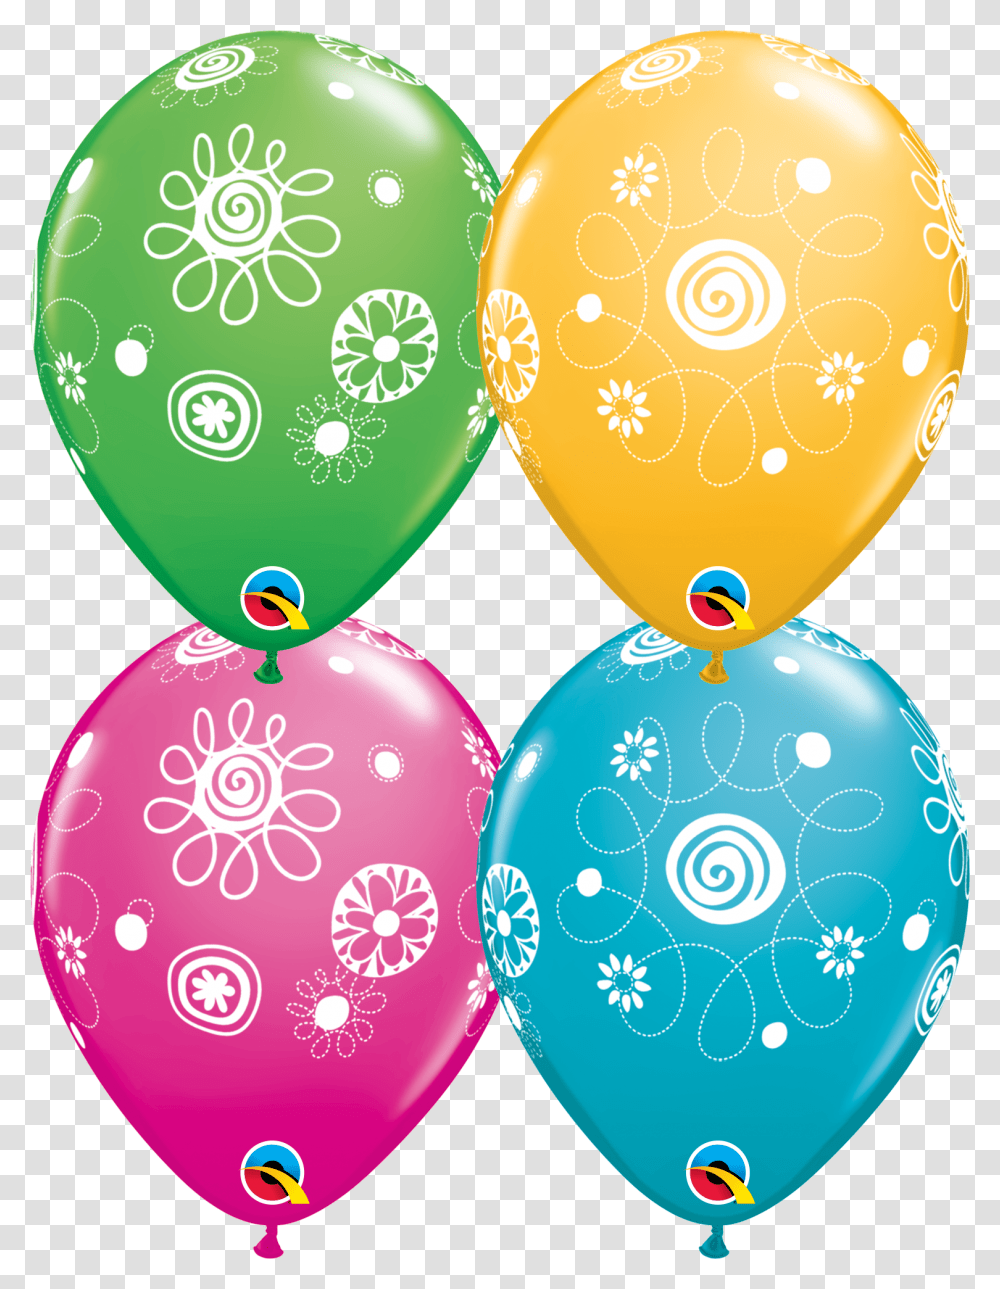 Flower And Balloon In Circle Logo Transparent Png